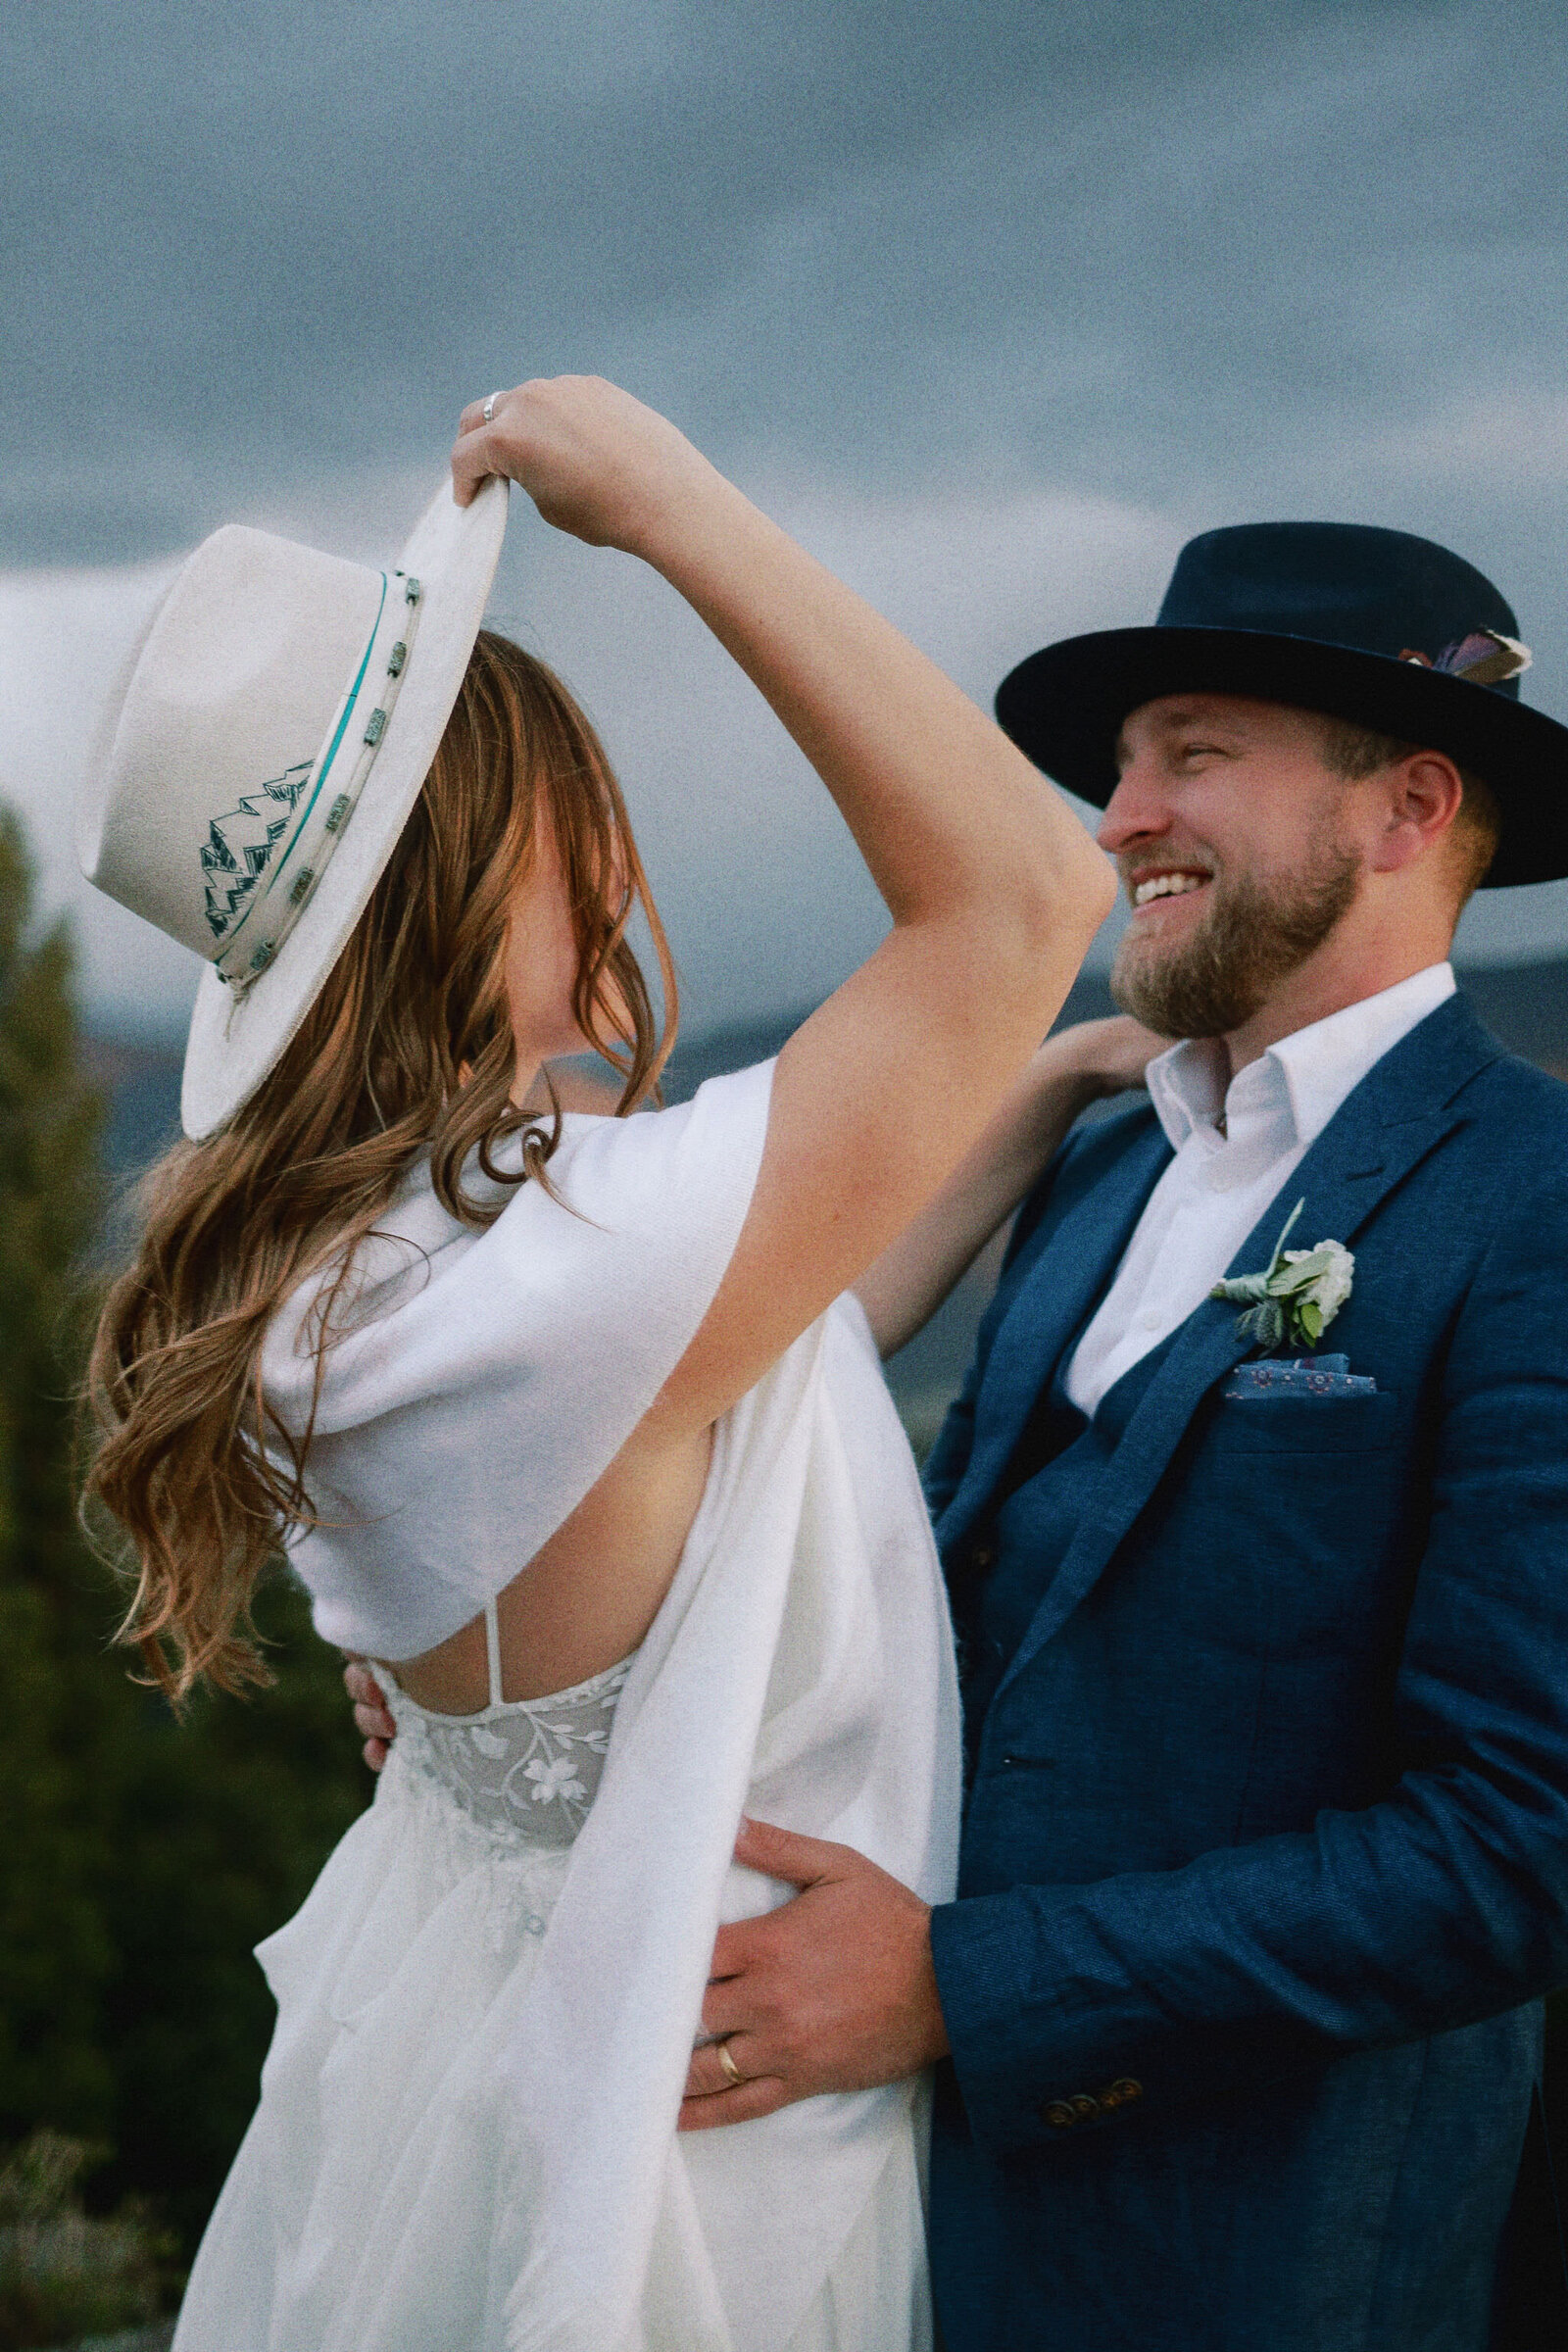 A groom with his hands around a bride's waist as she adjusts a hat.